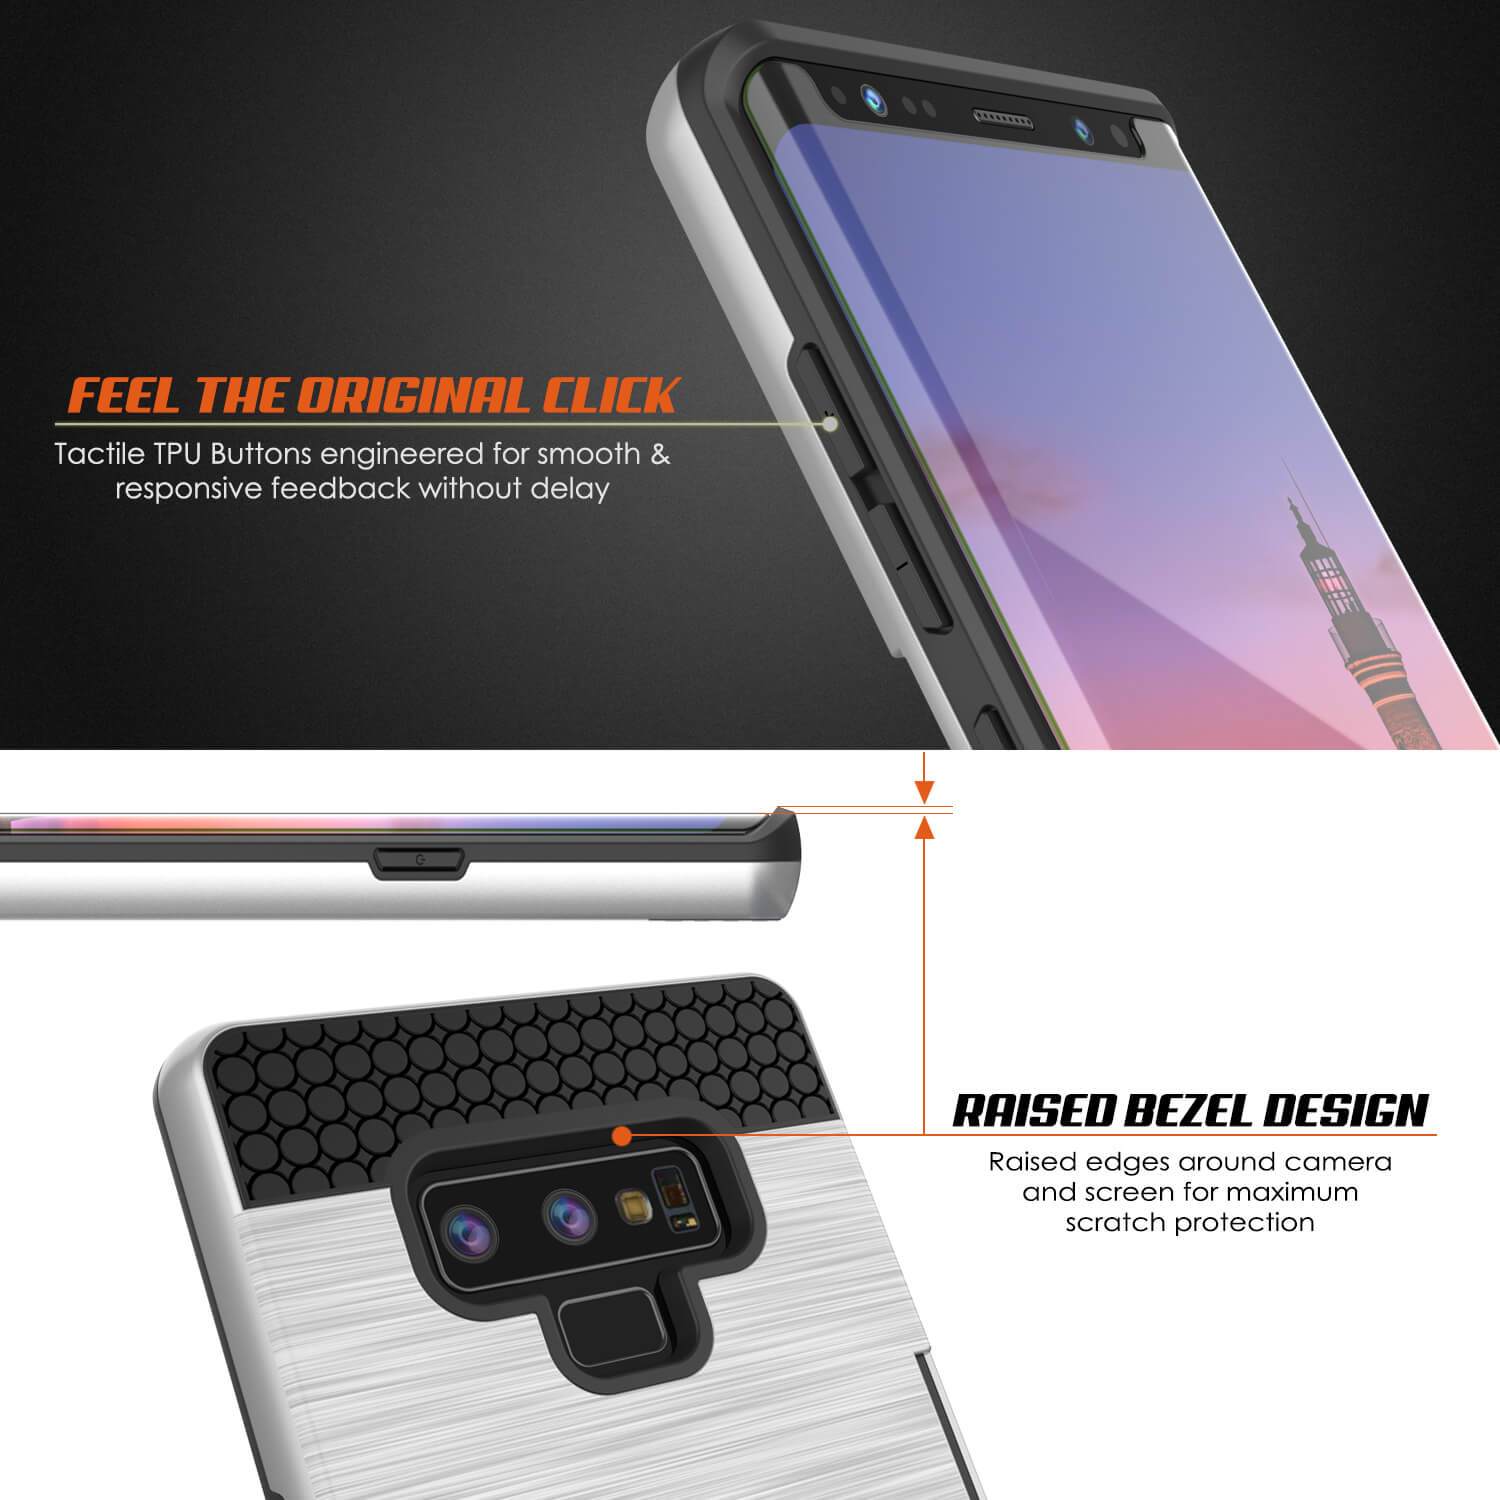 Galaxy Note 9 Case, Punkcase [SLOT Series] Slim Fit Cover [silver]